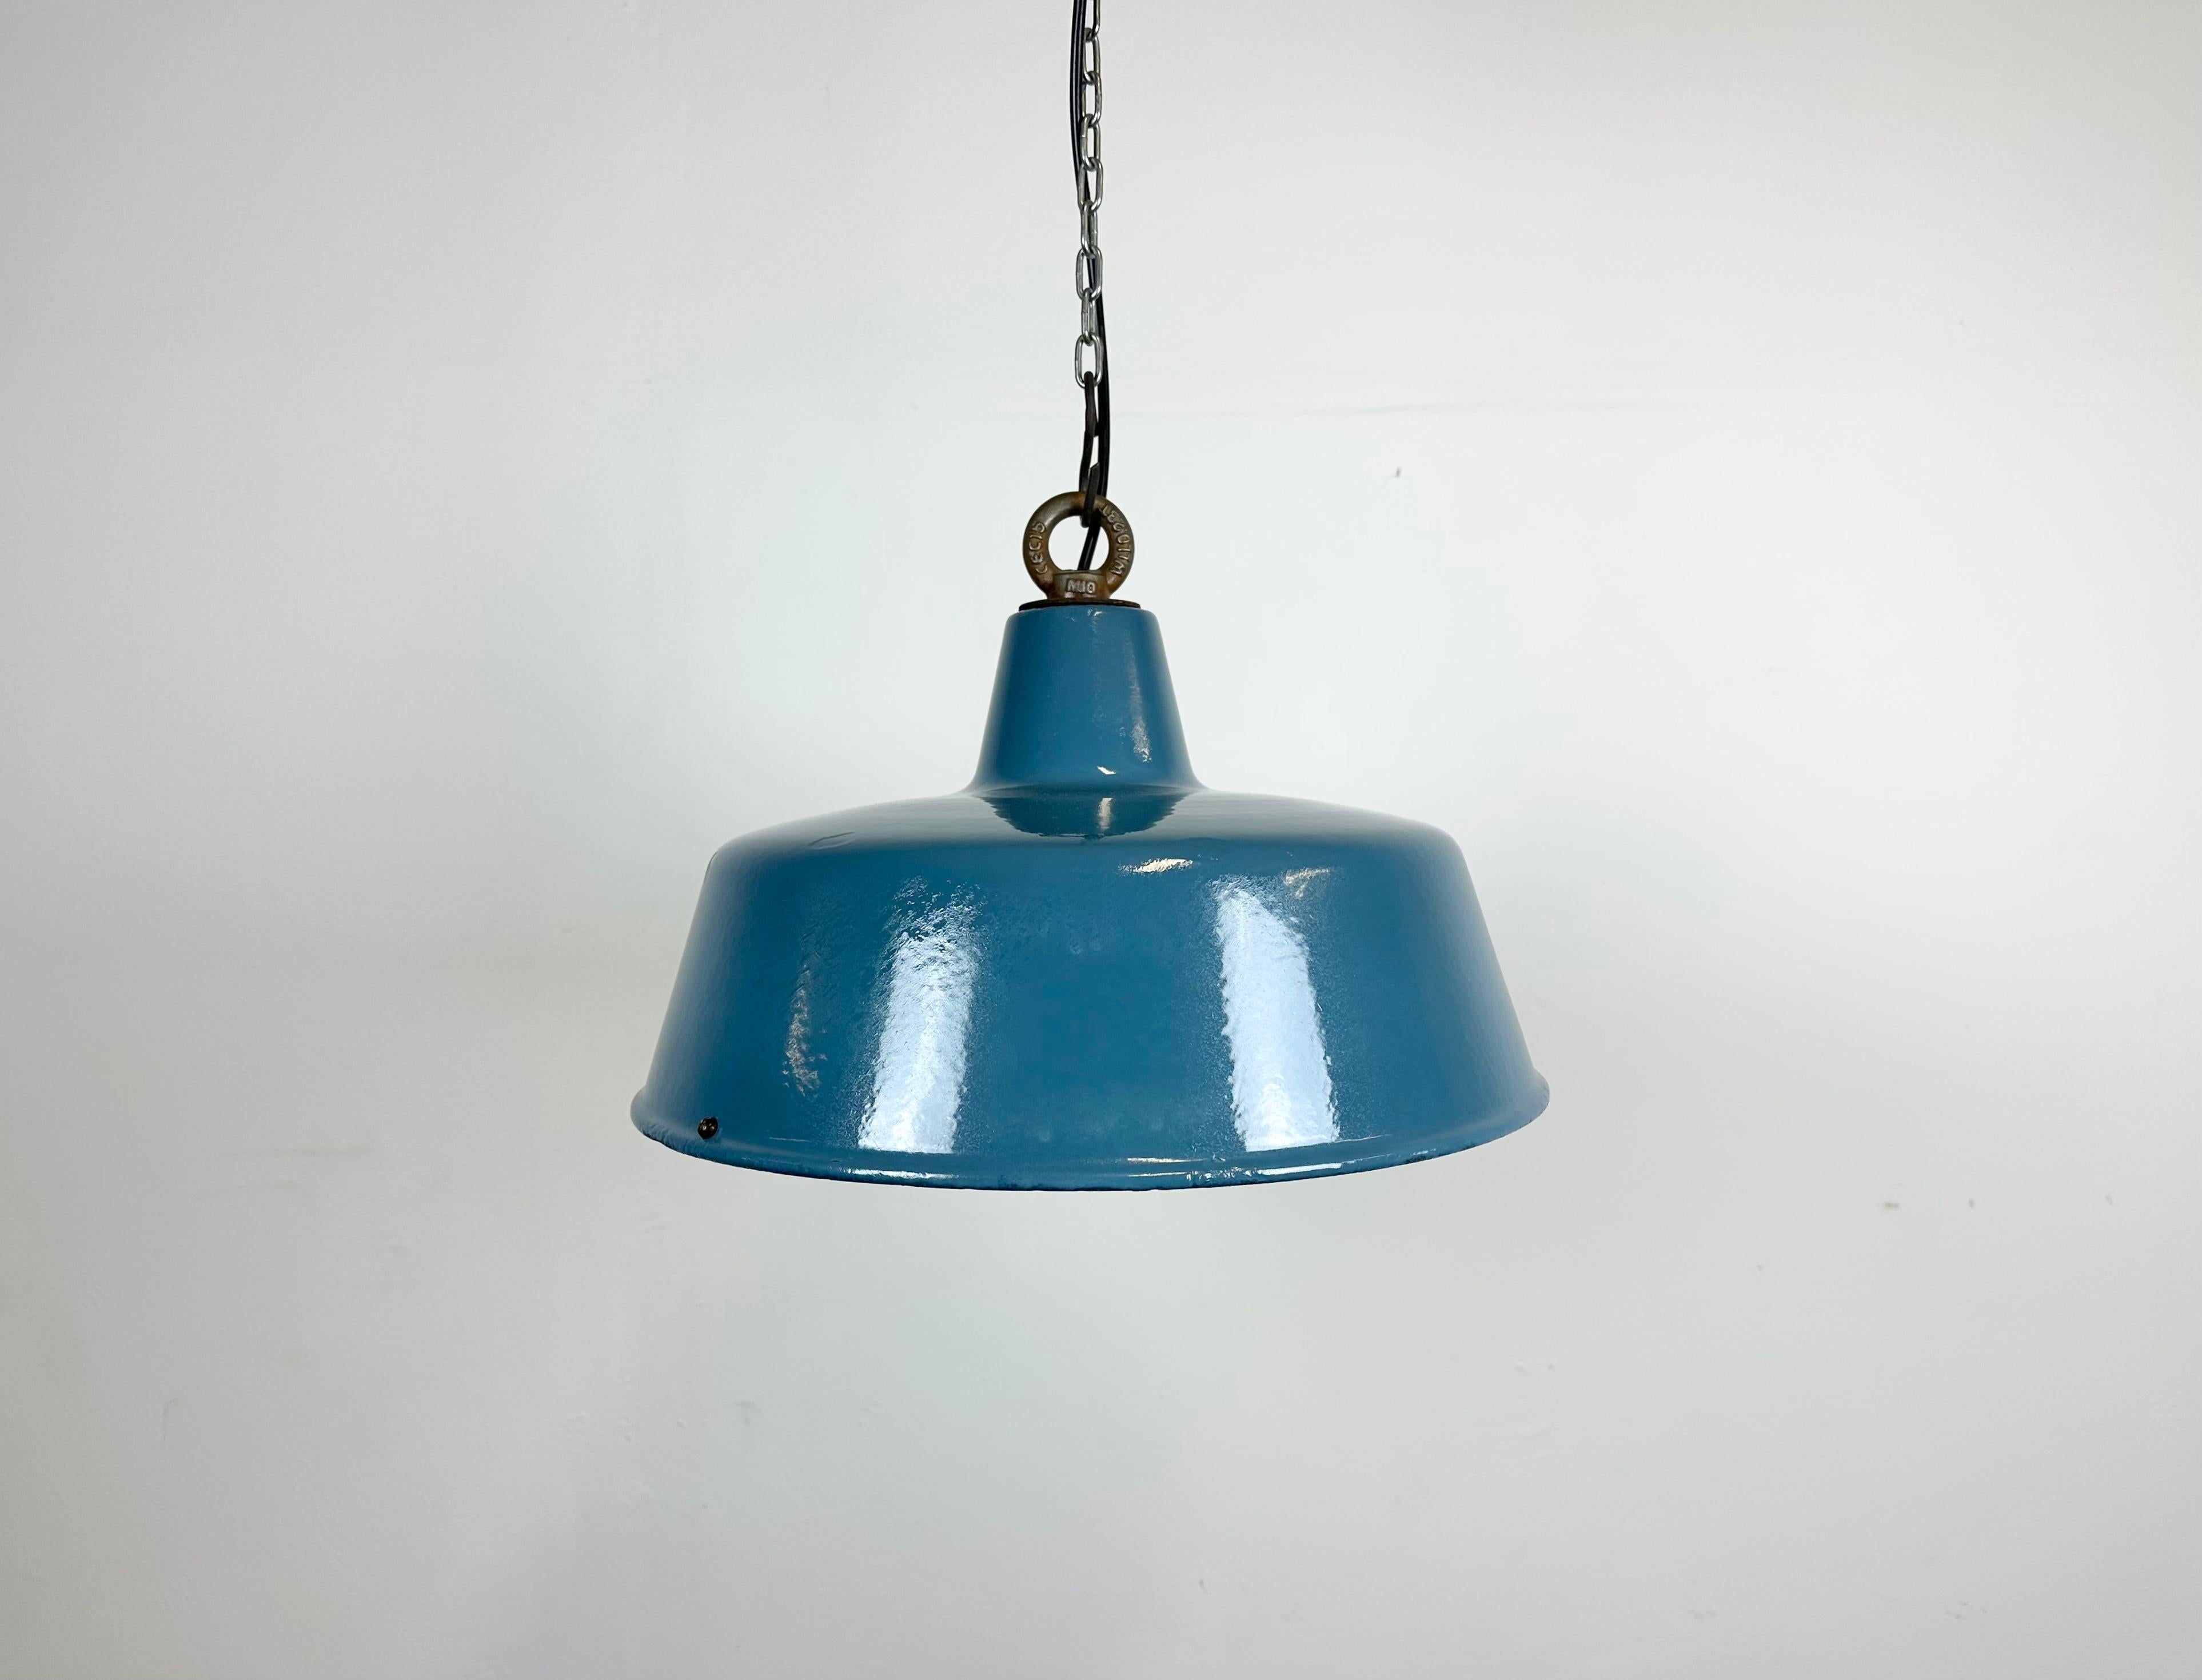 Industrial factory pendant lamp made in former Czechoslovakia during the 1950s. It features newly blue painted exterior with white enamel interior. Iron top. New porcelain socket rerquires standard E 27/ E26 light bulbs. New wire.
The diameter of